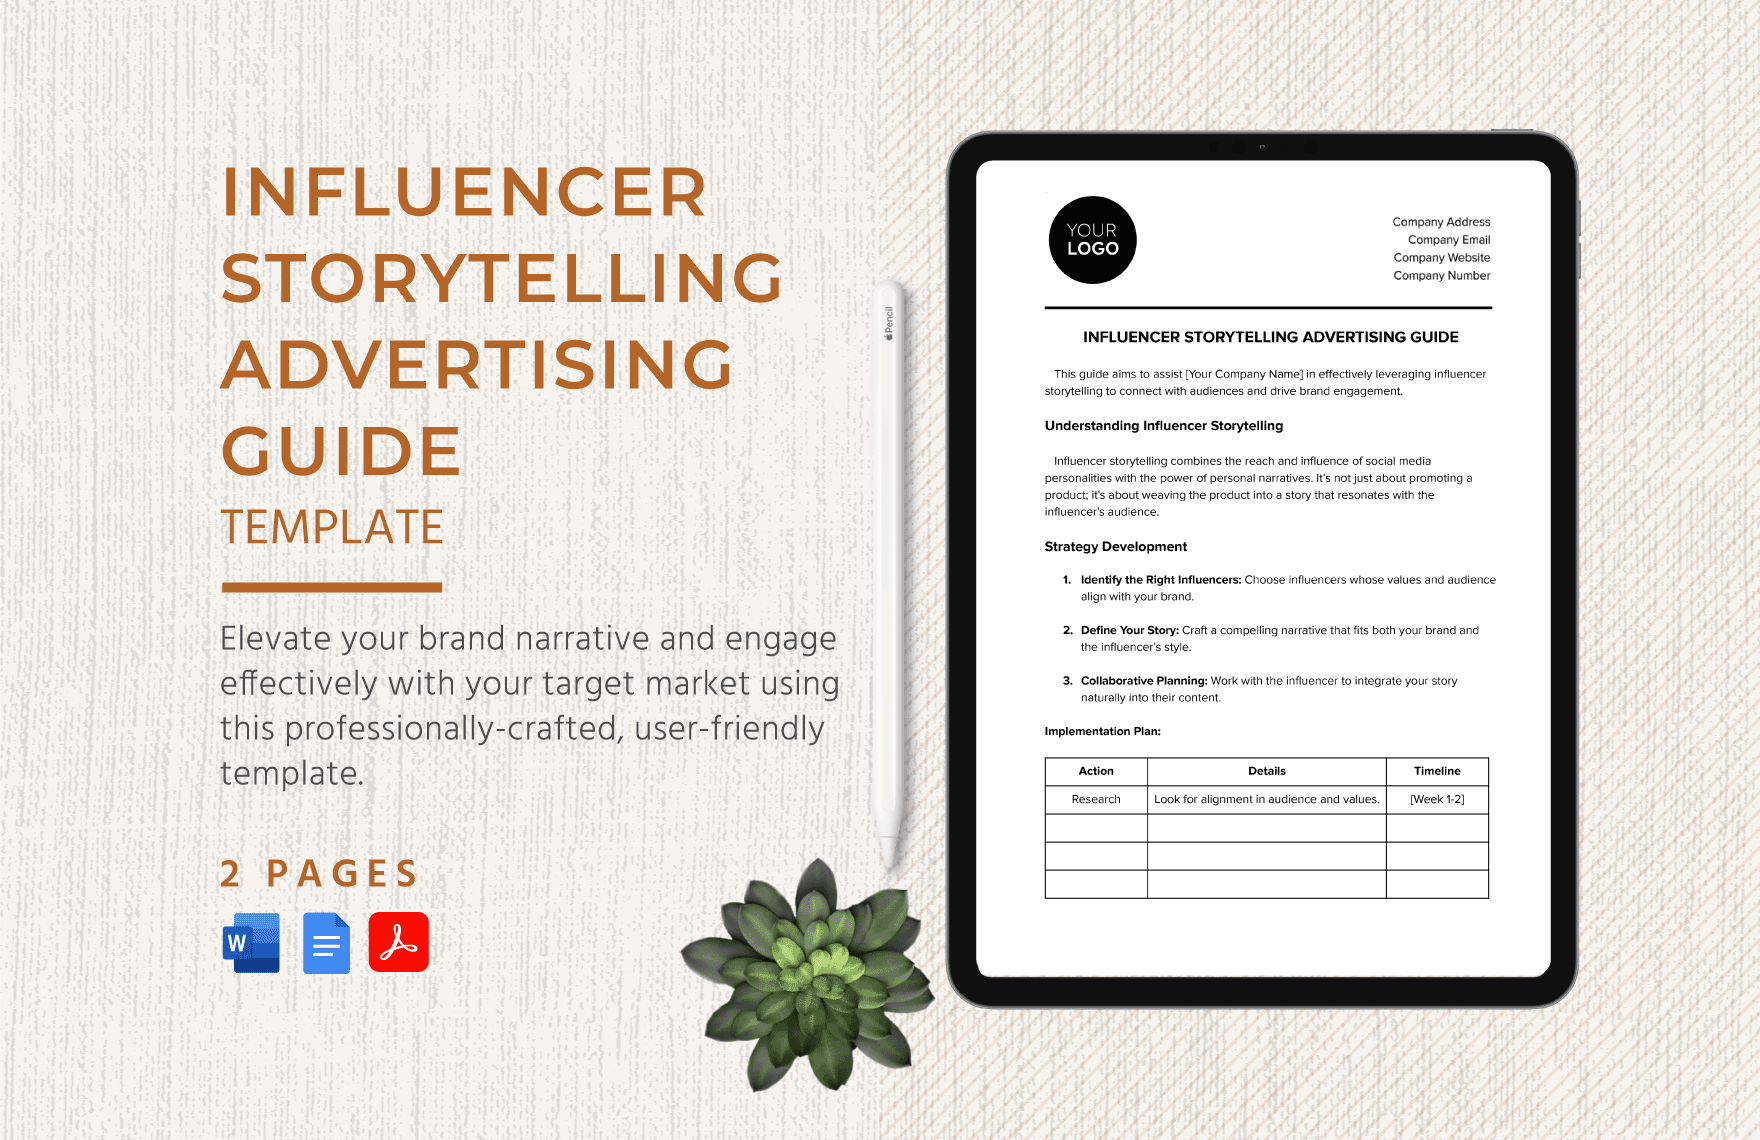 Influencer Storytelling Advertising Guide Template in Word, Google Docs, PDF